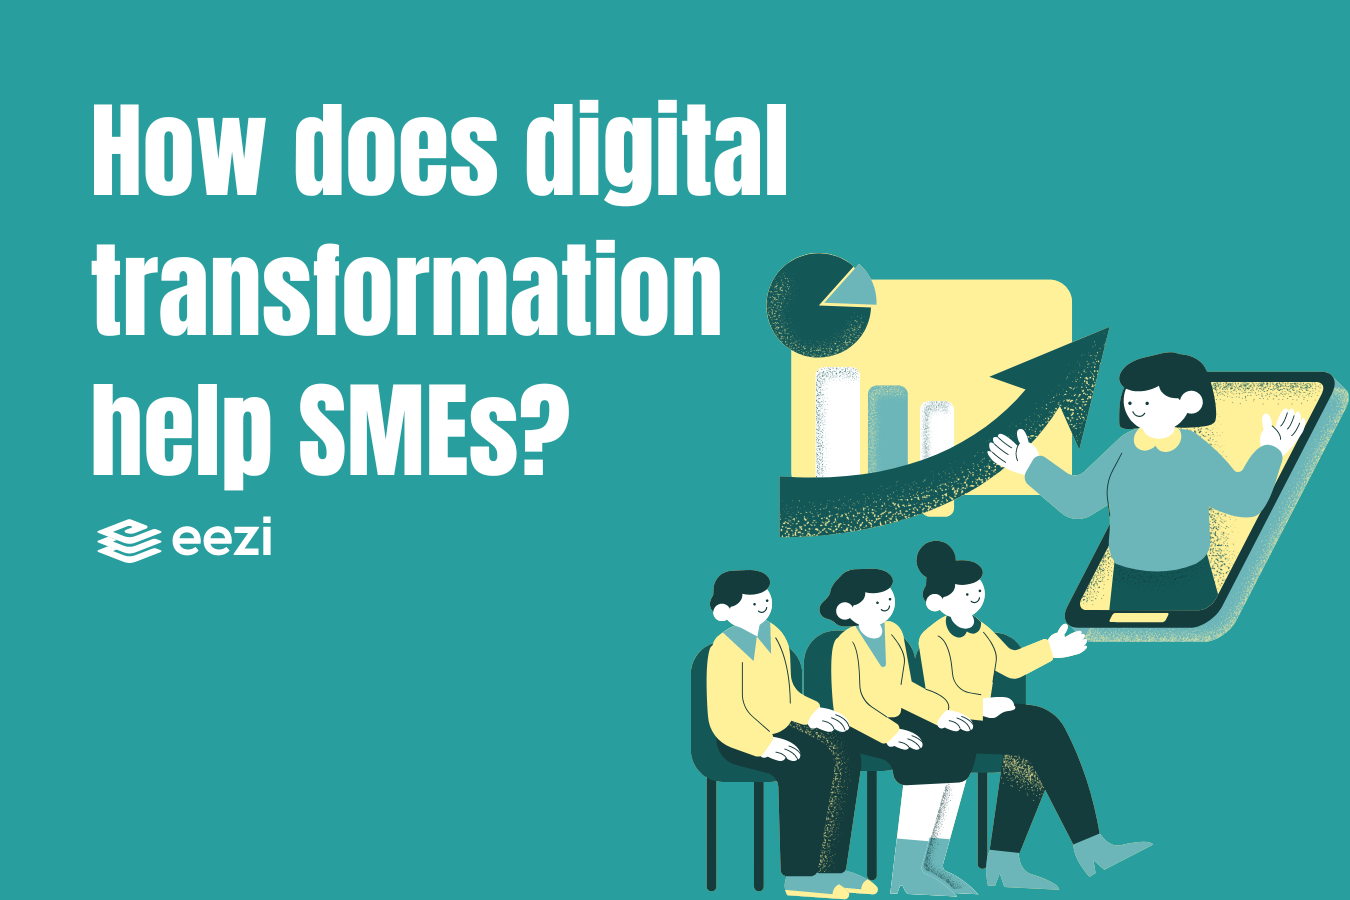 How does digital transformation help SMEs?